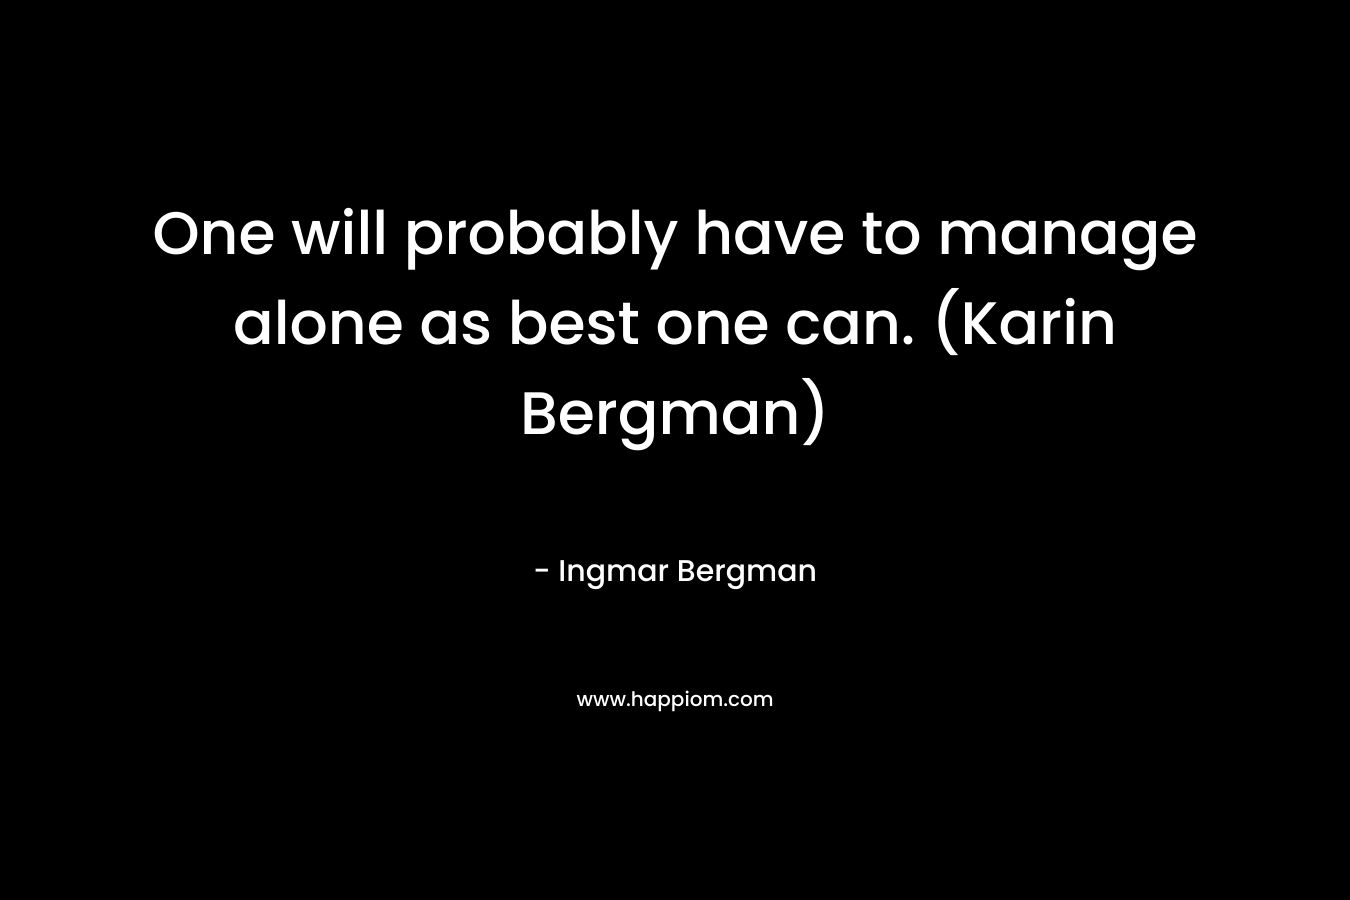 One will probably have to manage alone as best one can. (Karin Bergman) – Ingmar Bergman